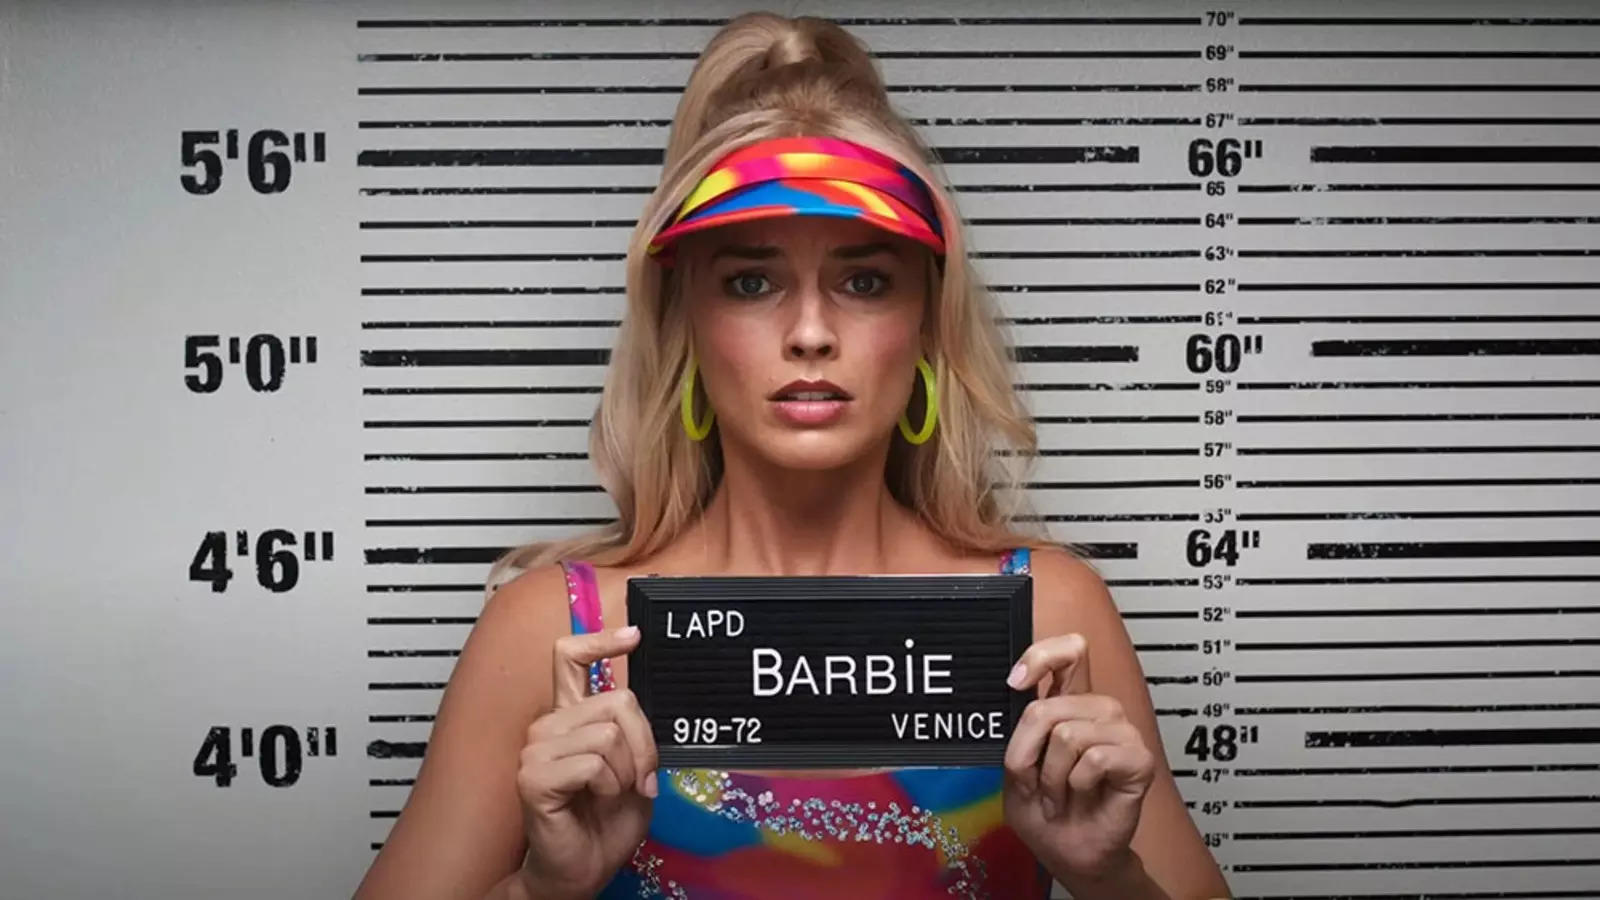 Margot Robbie's Barbie banned in Kuwait, Lebanon Culture Minister Says Film 'Contradicts Faith, Promotes Homosexuality'